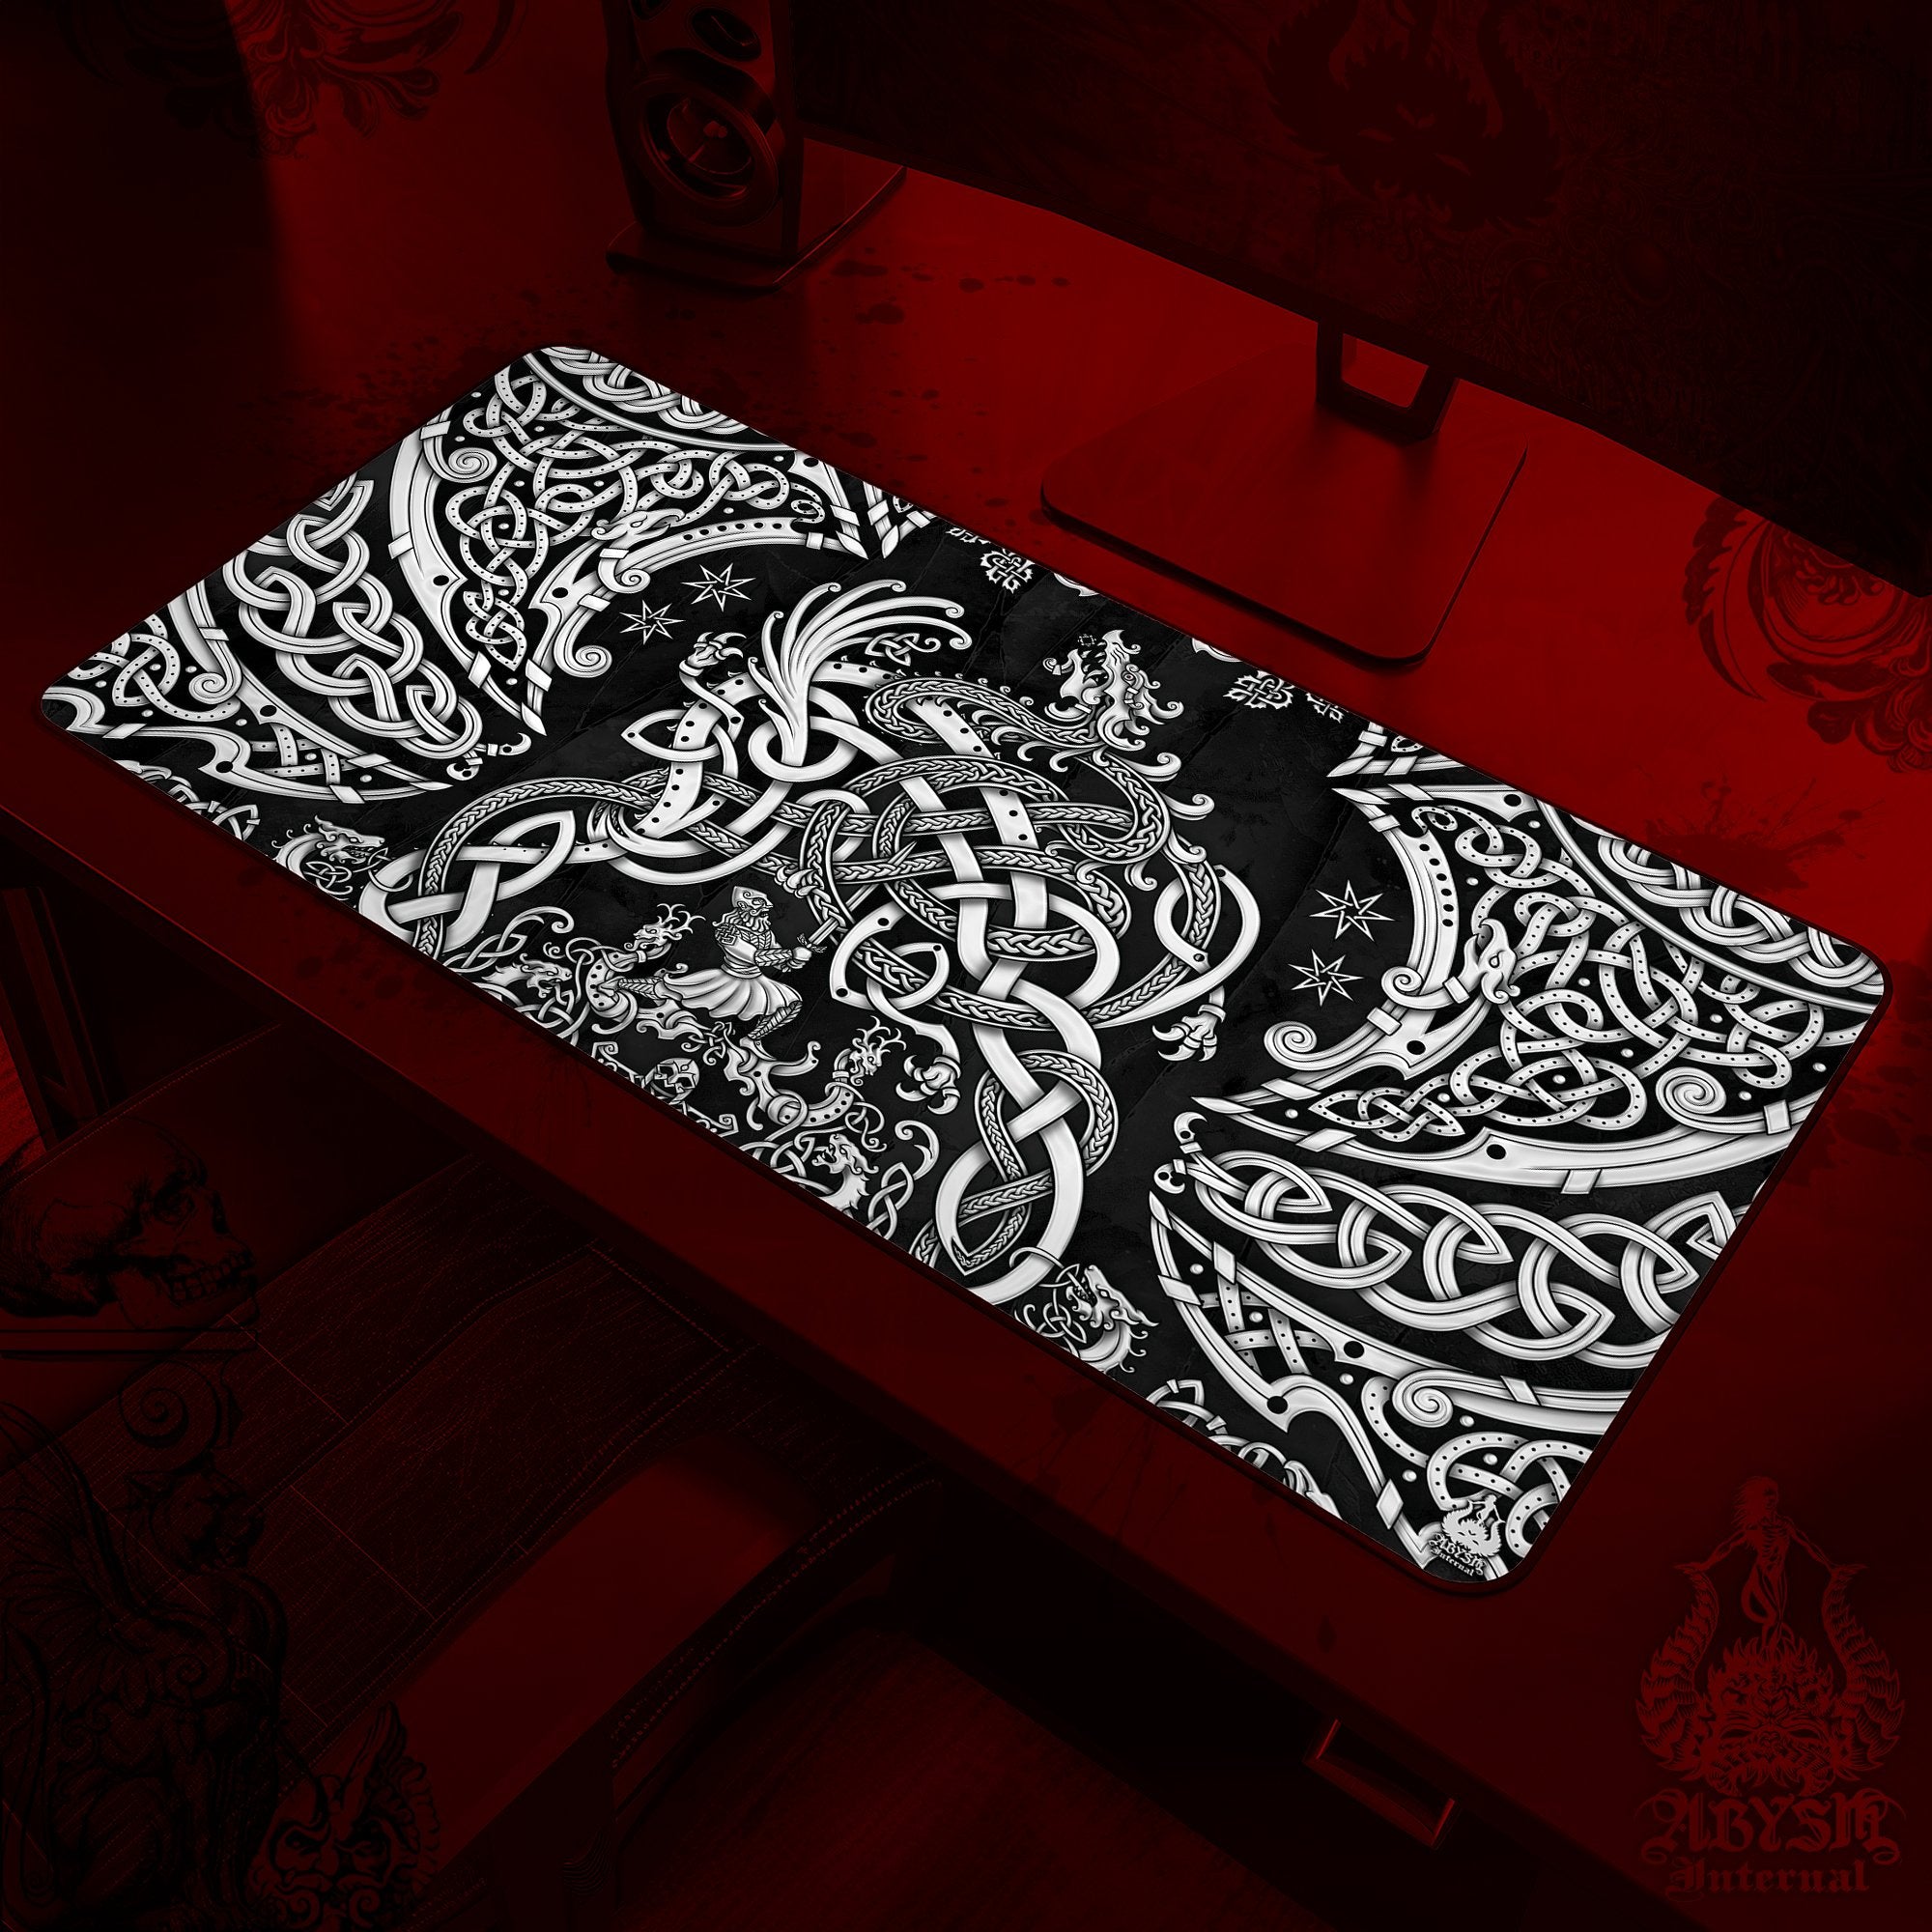 Viking Dragon Gaming Desk Mat, Norse Knotwork Mouse Pad, Nordic Table Protector Cover, Fafnir Workpad, Art Print - White, 3 Colors - Abysm Internal